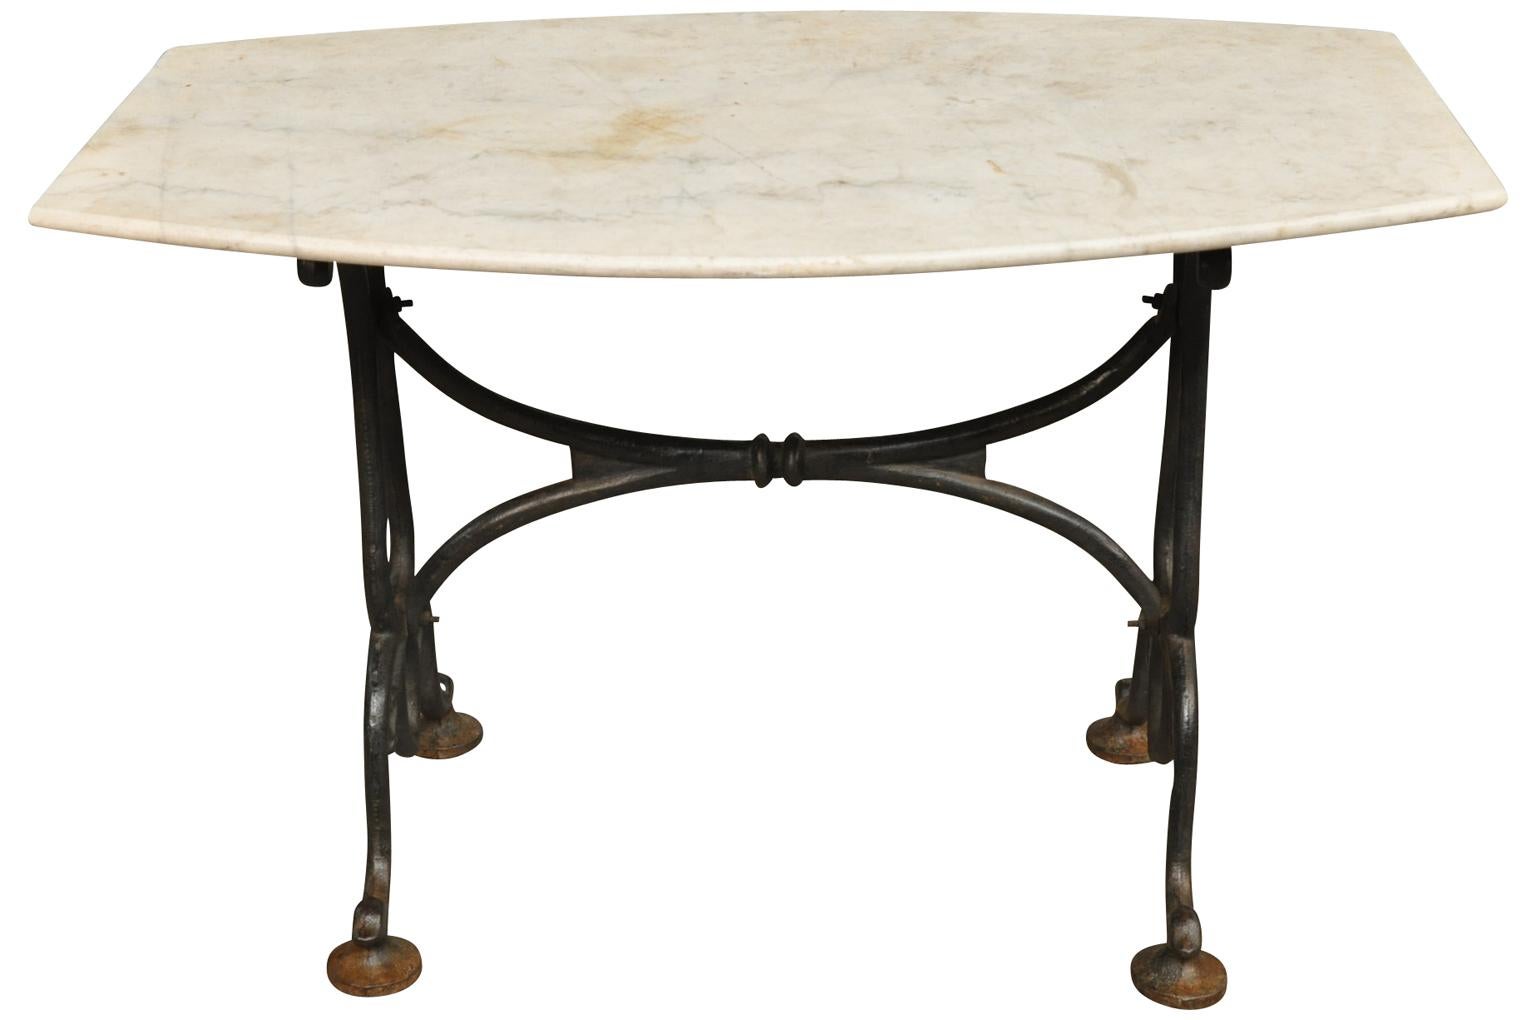 A very lovely 19th century garden table, console from the Provence region of France. Soundly constructed with a painted cast iron base with its beautifully patina'd marble top. A perfect table for any interior of exterior.